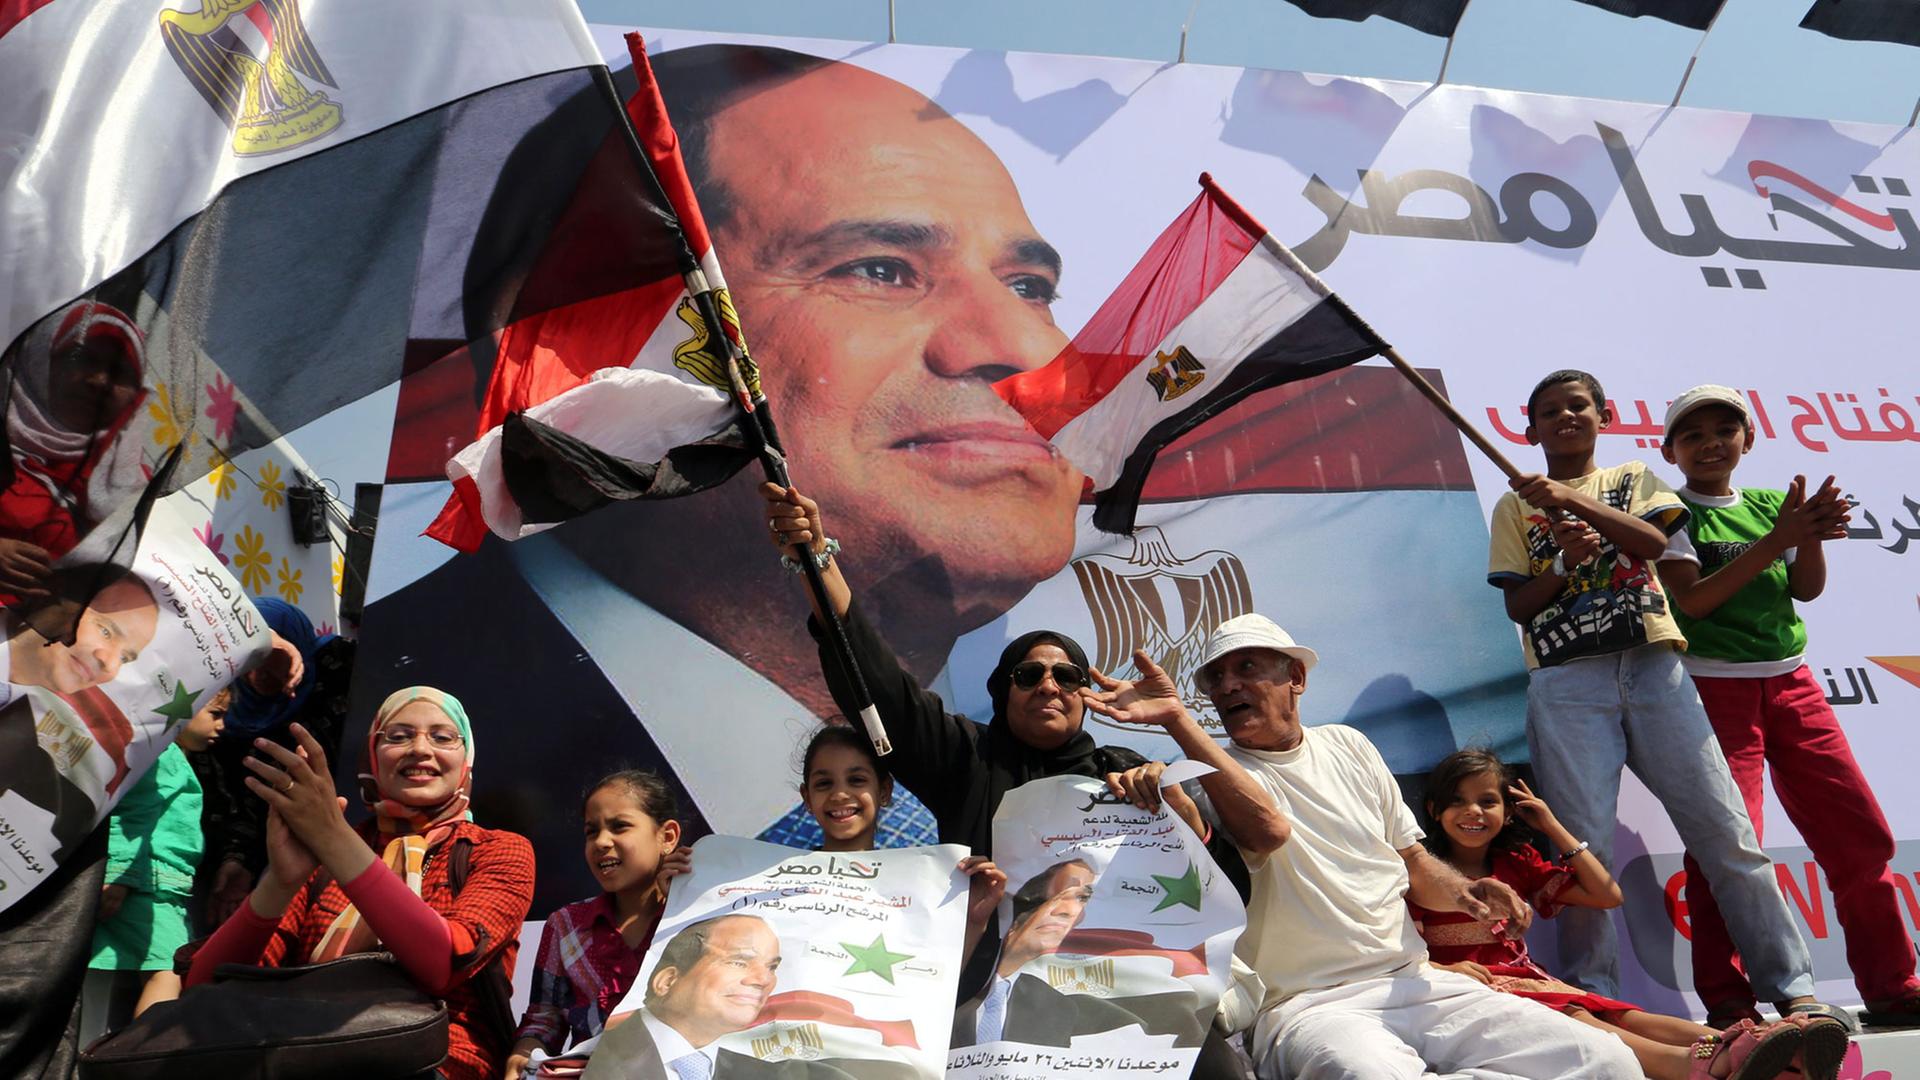 Supporters of Egypt's former Defense Minister Abdel Fattah al-Sissi hold campaign posters with his portrait during a rally in Cairo, Egypt, 23 May 2014. Egypt's presidential election will take place on 26 and 27 May 2014.